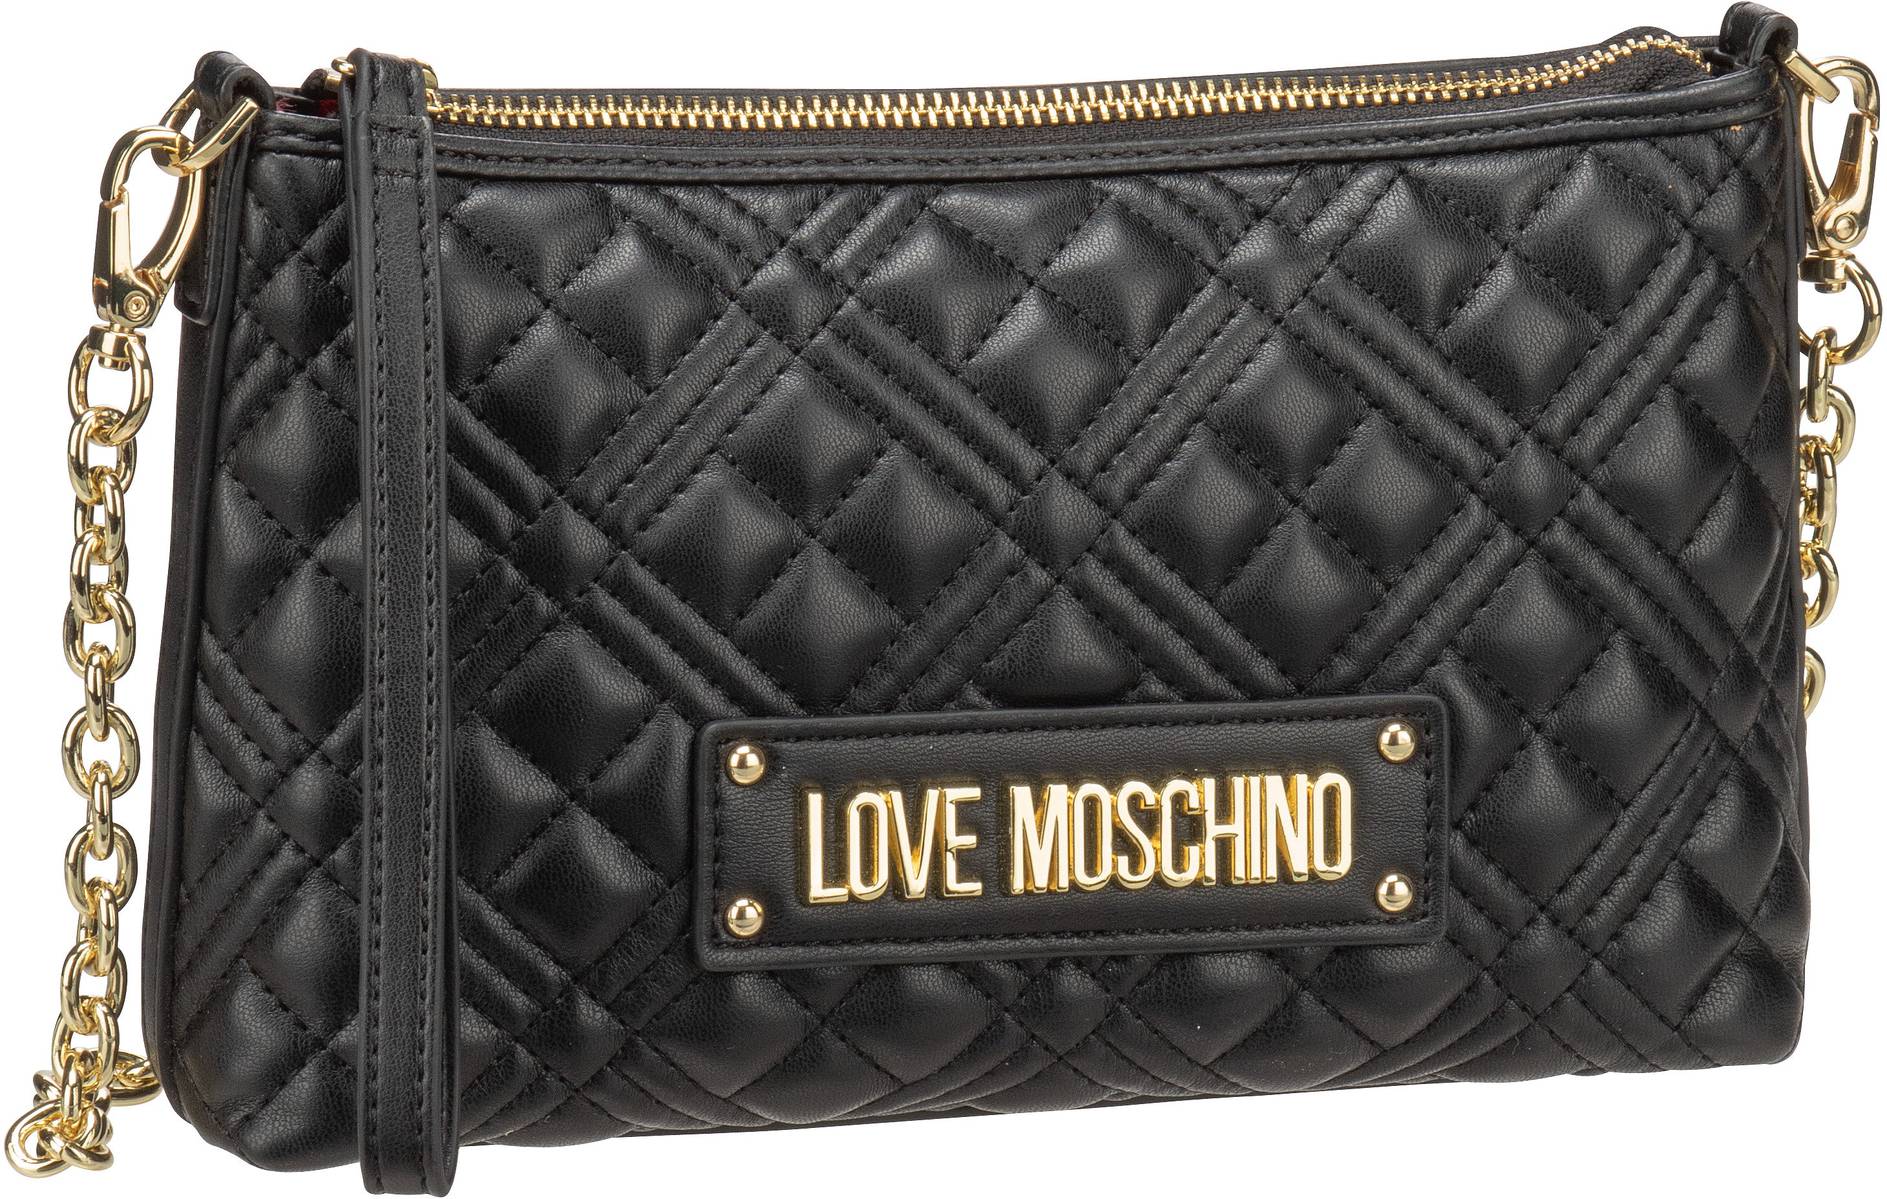 Love Moschino Quilted Bag 4013 - Black